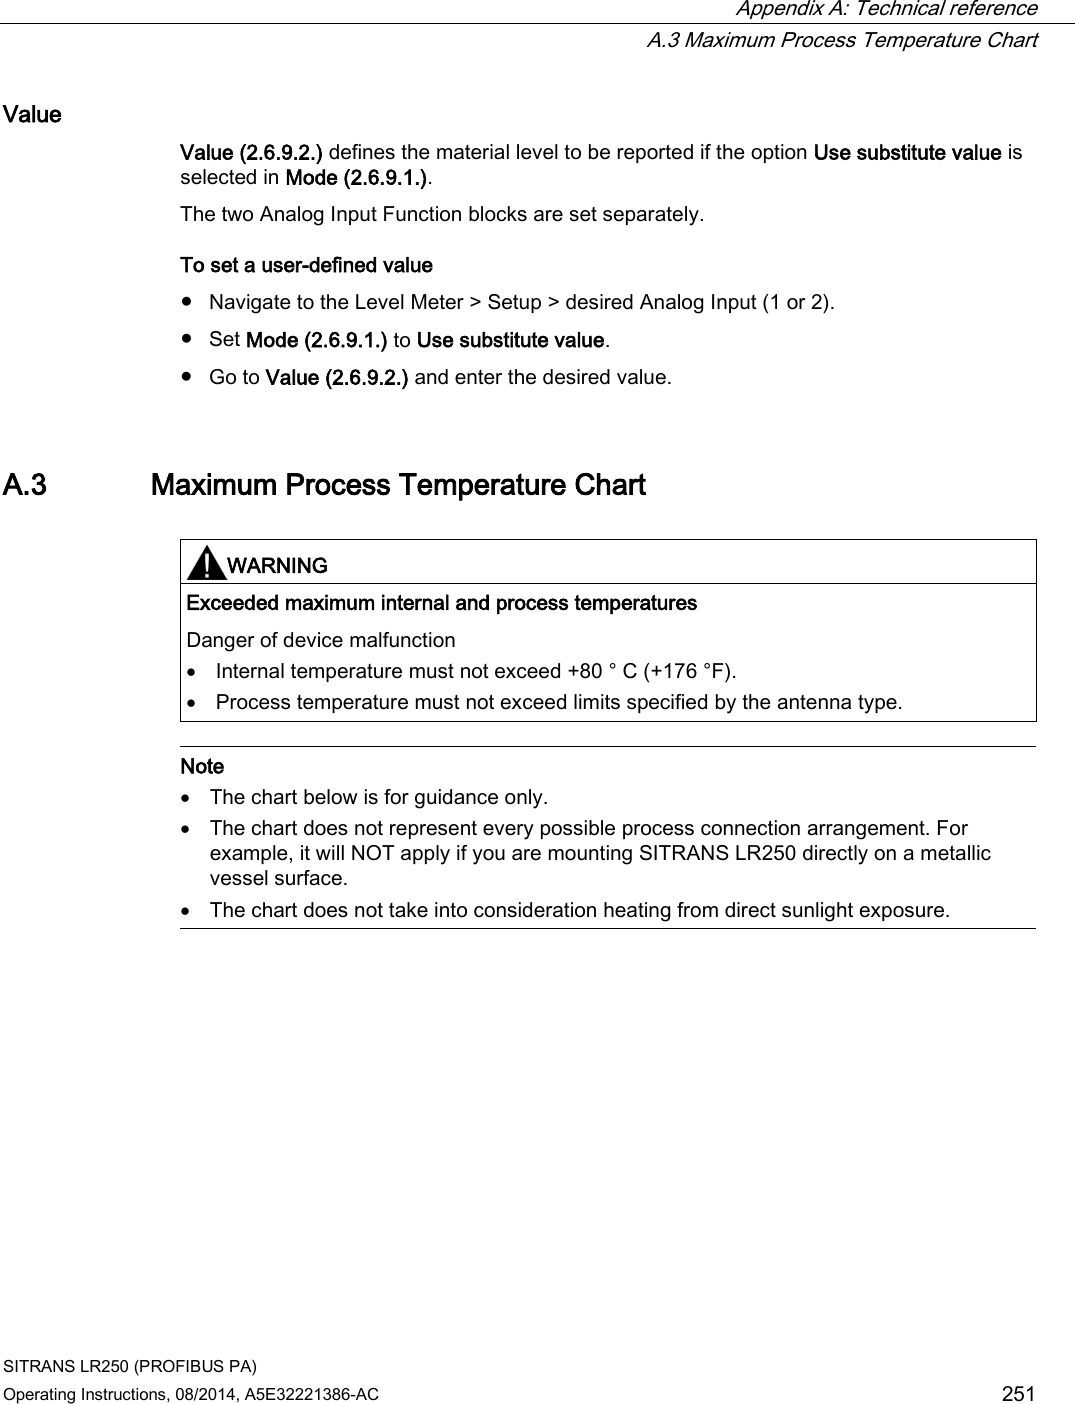  Appendix A: Technical reference  A.3 Maximum Process Temperature Chart SITRANS LR250 (PROFIBUS PA) Operating Instructions, 08/2014, A5E32221386-AC 251 Value Value (2.6.9.2.) defines the material level to be reported if the option Use substitute value is selected in Mode (2.6.9.1.). The two Analog Input Function blocks are set separately. To set a user-defined value ● Navigate to the Level Meter &gt; Setup &gt; desired Analog Input (1 or 2). ● Set Mode (2.6.9.1.) to Use substitute value. ● Go to Value (2.6.9.2.) and enter the desired value. A.3 Maximum Process Temperature Chart   WARNING Exceeded maximum internal and process temperatures Danger of device malfunction • Internal temperature must not exceed +80 ° C (+176 °F). • Process temperature must not exceed limits specified by the antenna type.   Note • The chart below is for guidance only. • The chart does not represent every possible process connection arrangement. For example, it will NOT apply if you are mounting SITRANS LR250 directly on a metallic vessel surface. • The chart does not take into consideration heating from direct sunlight exposure.  